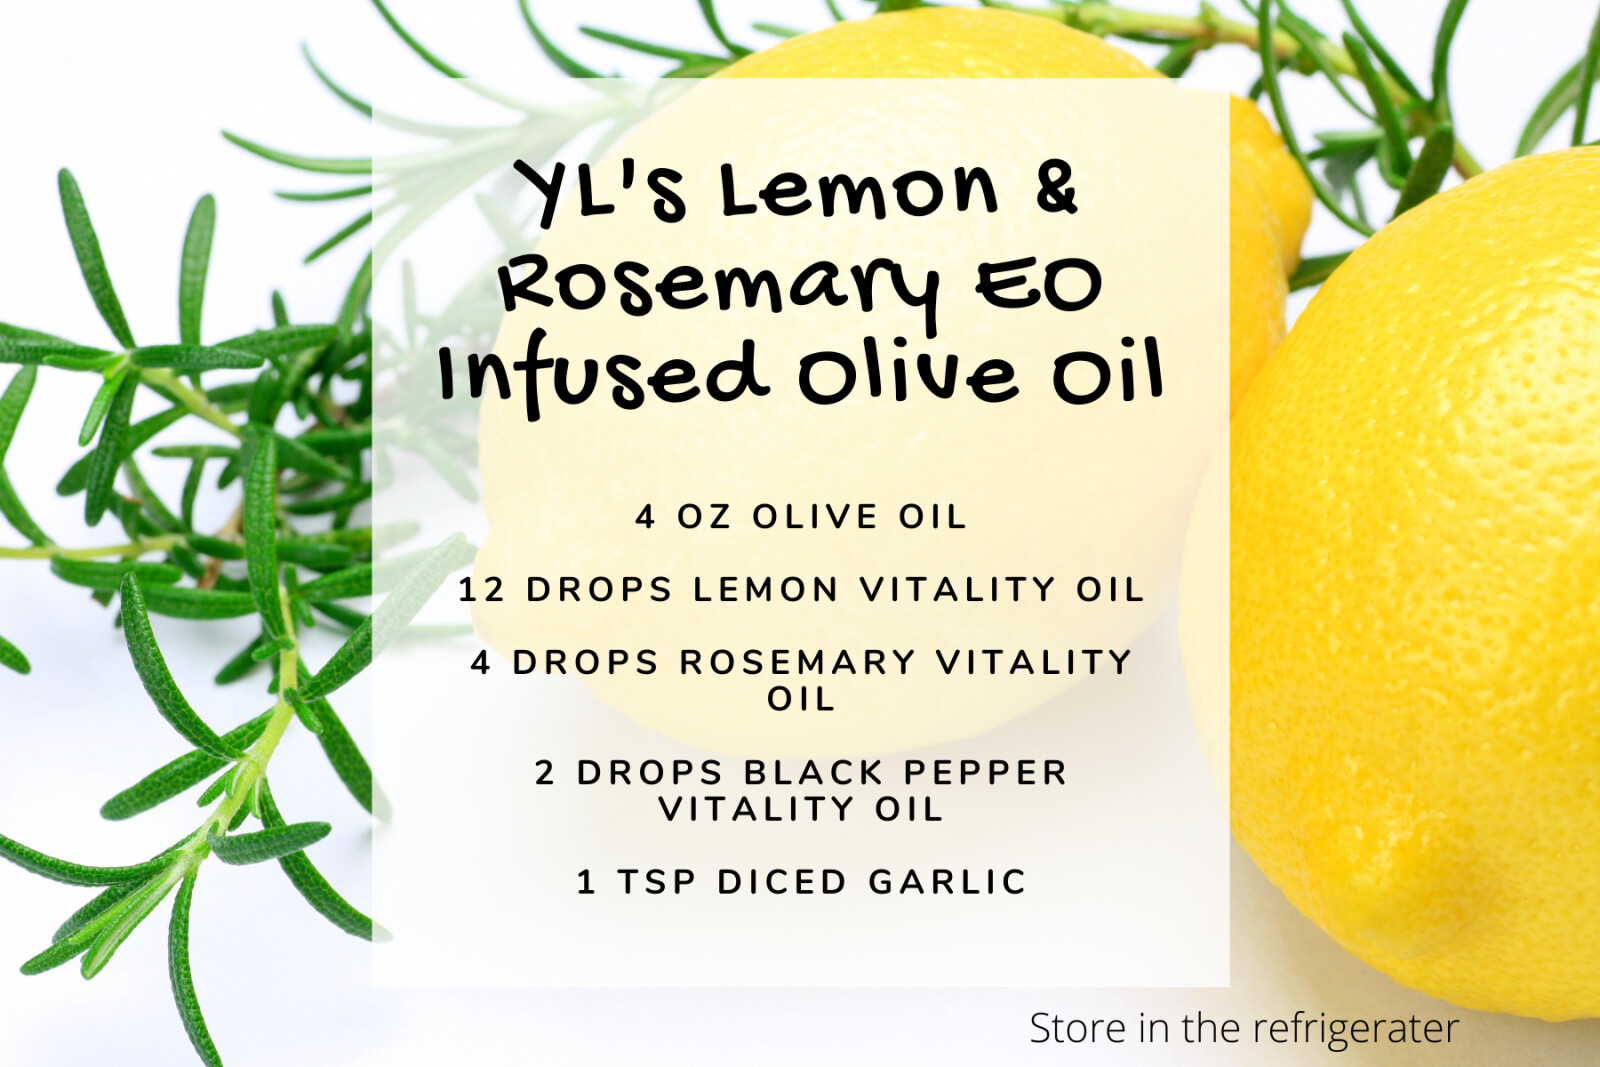 Lemon and Rosemary Essential Oil Infused Olive Oil